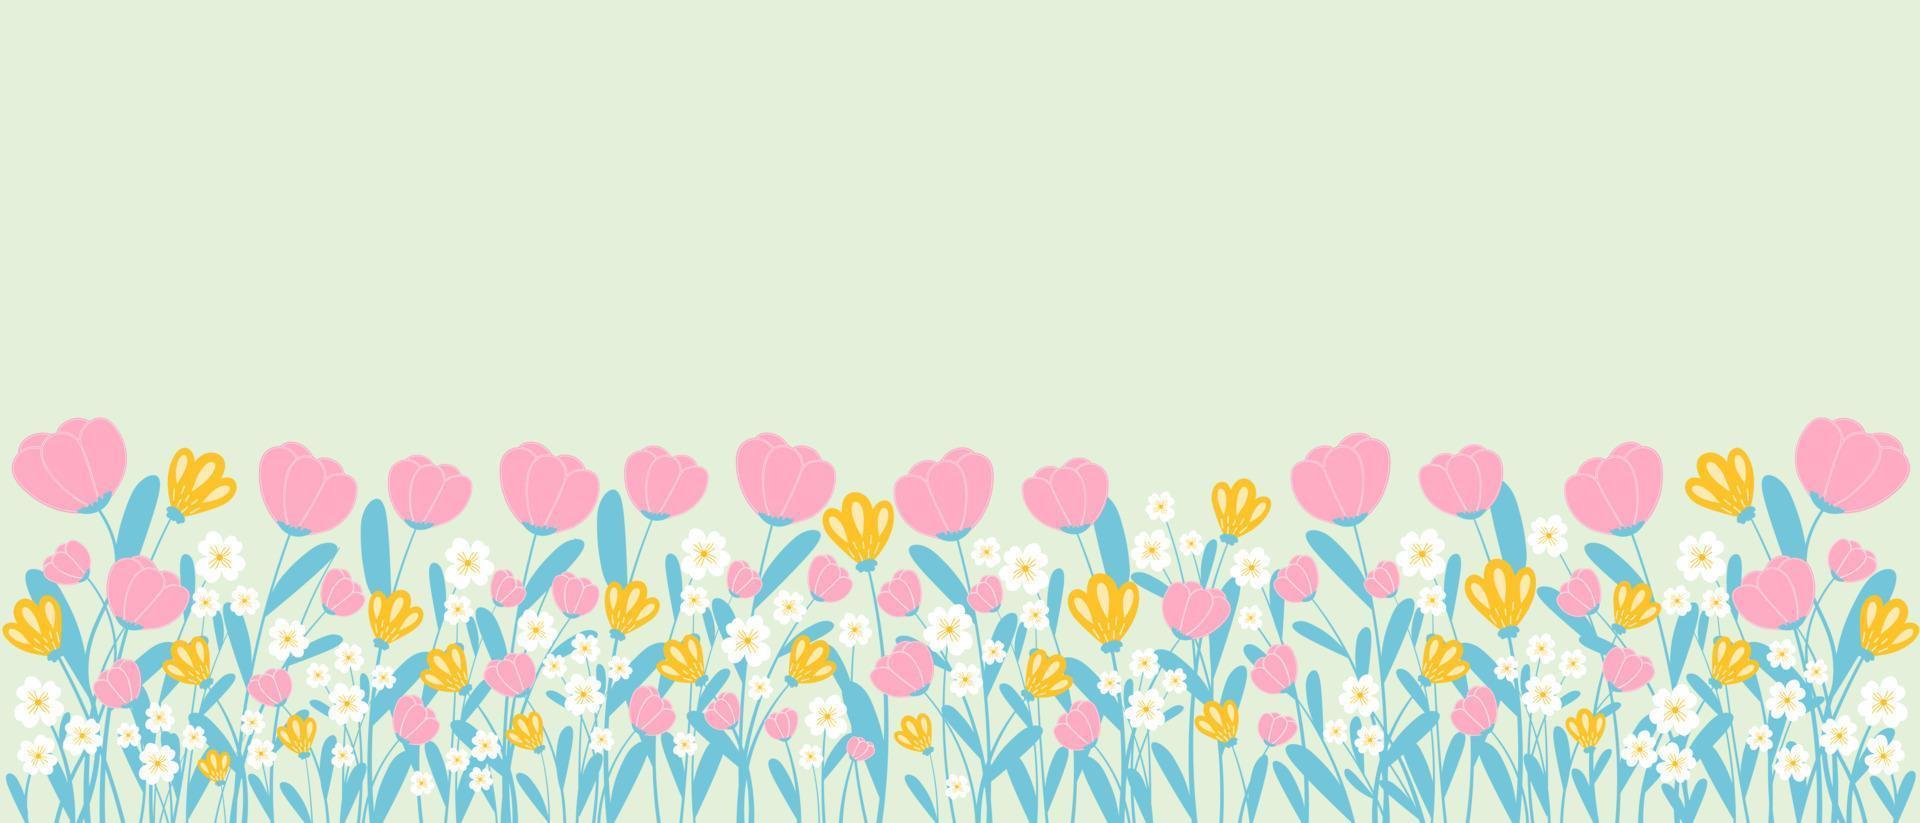 Spring backdrop with border of blooming flowers and leaves in hand drawn style, horizontal banner template vector